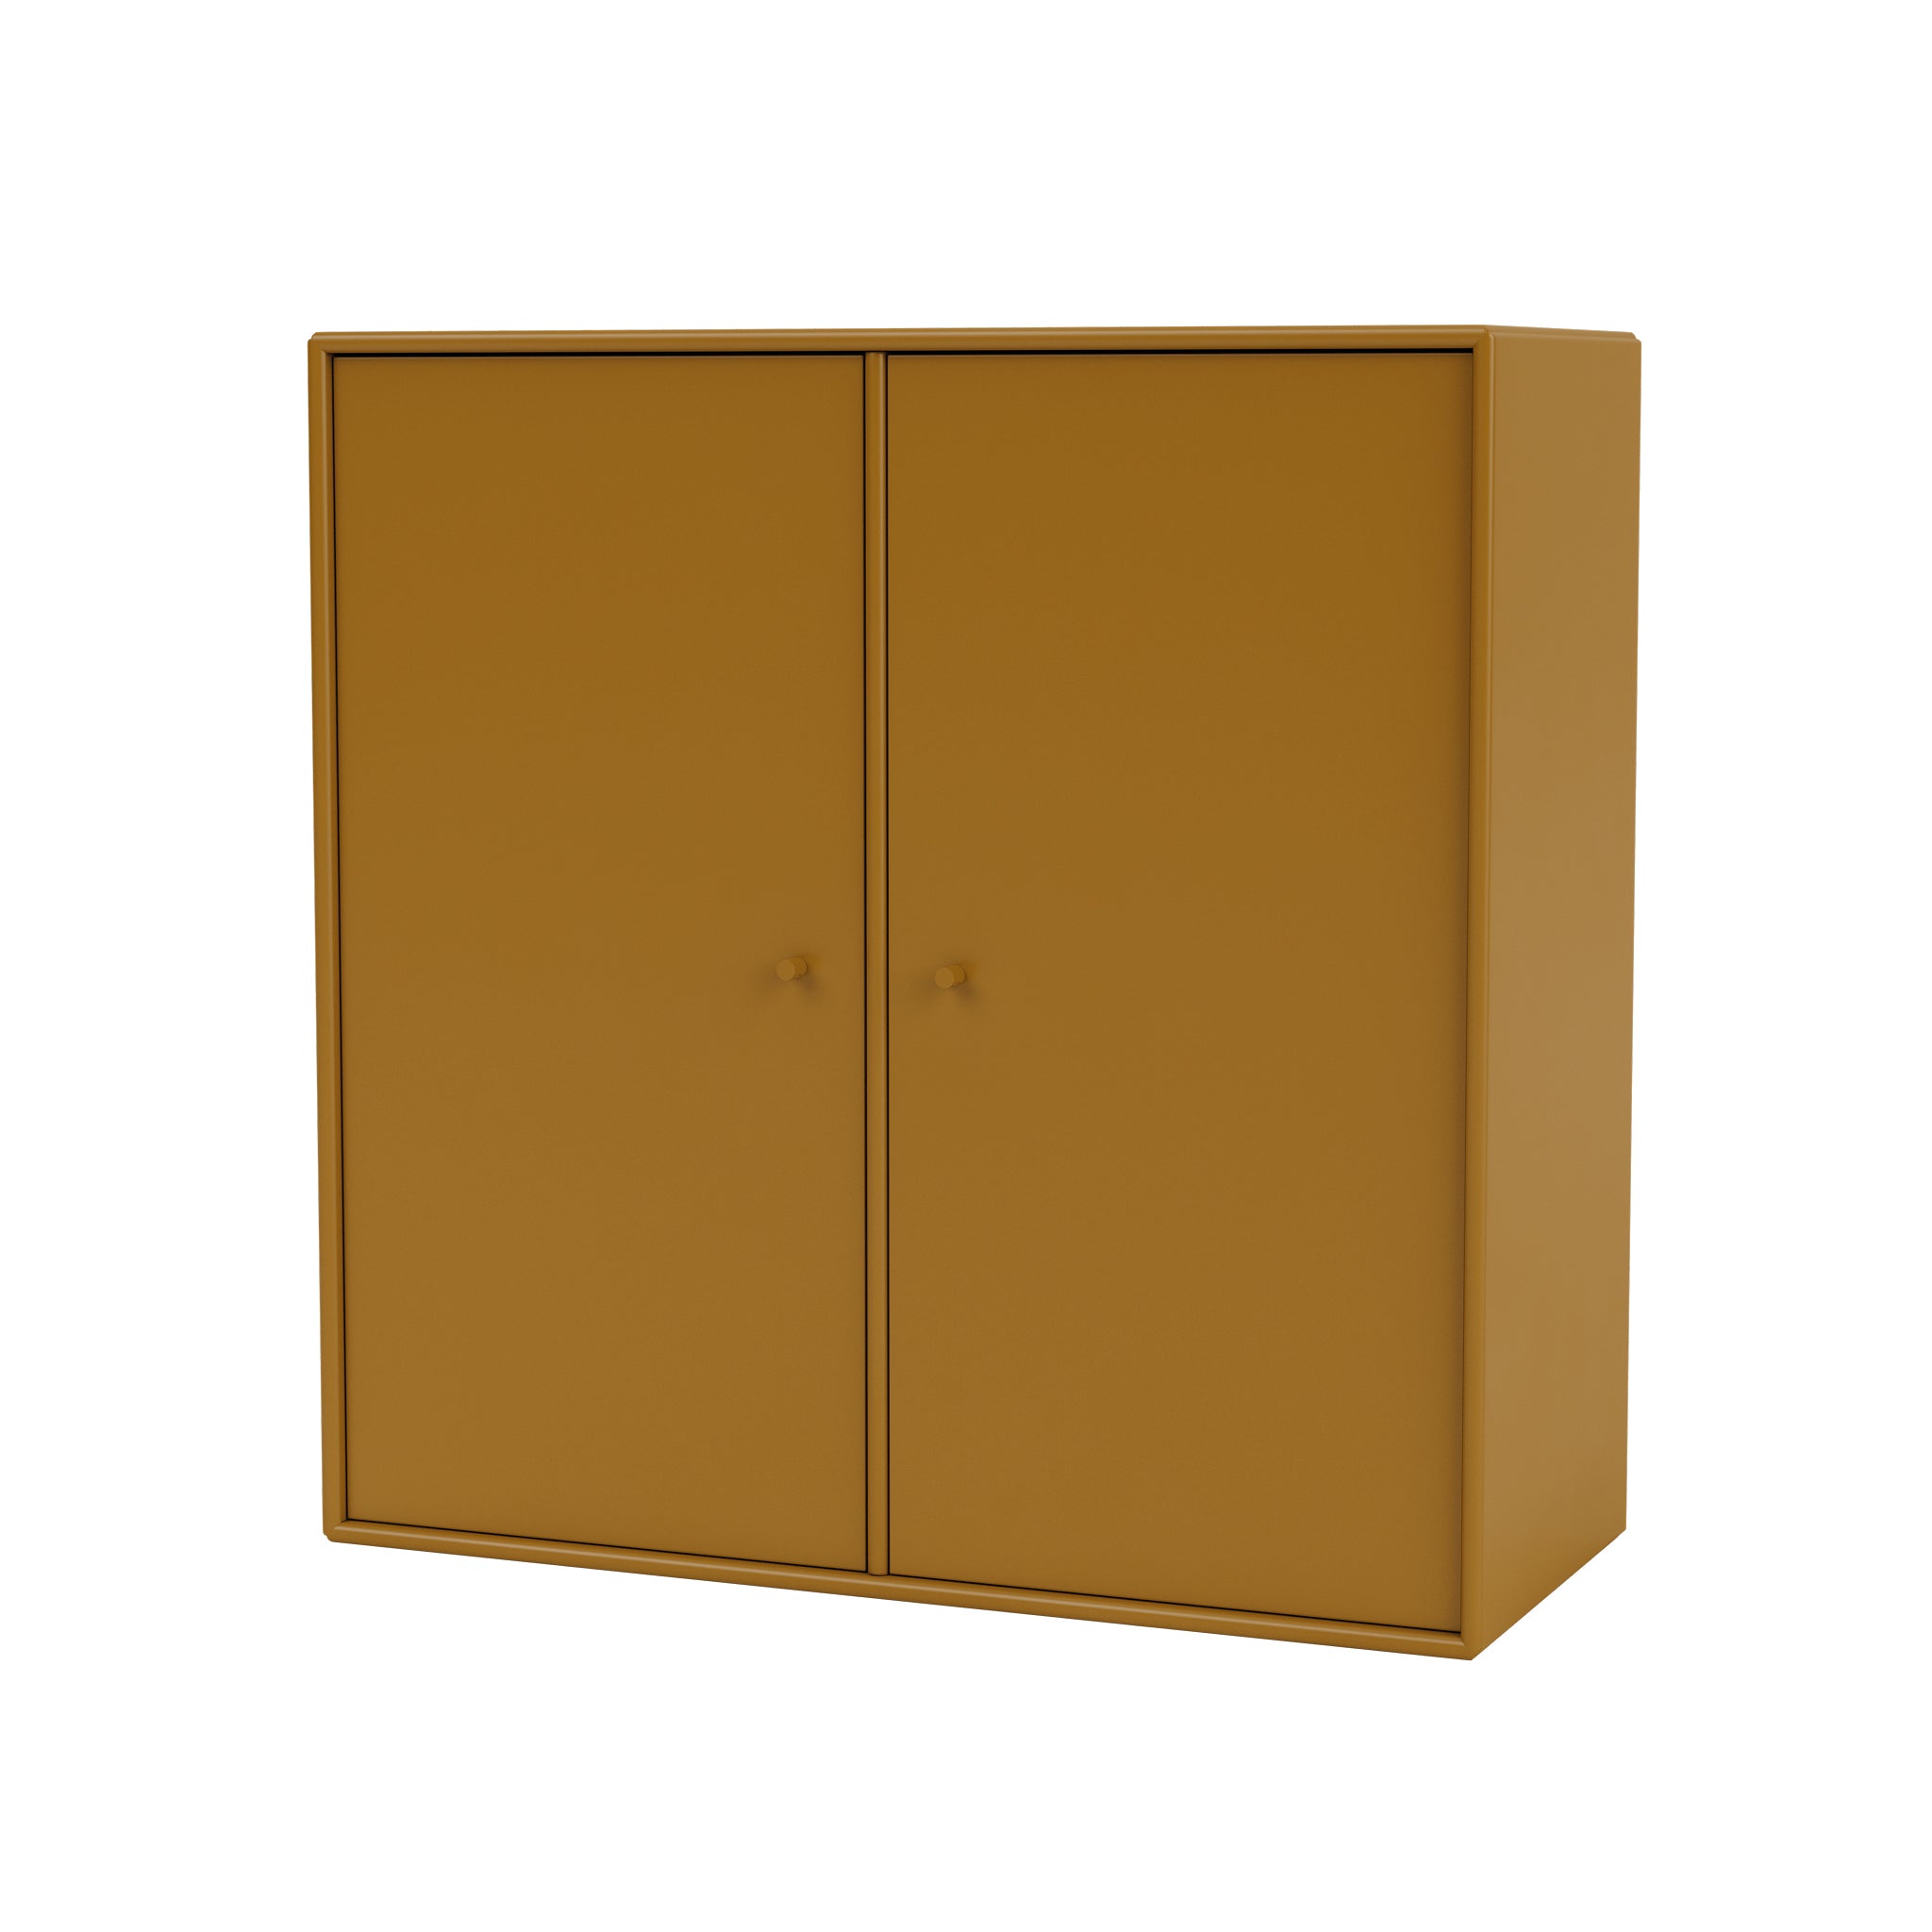 Cover Shelving Unit by Montana Furniture